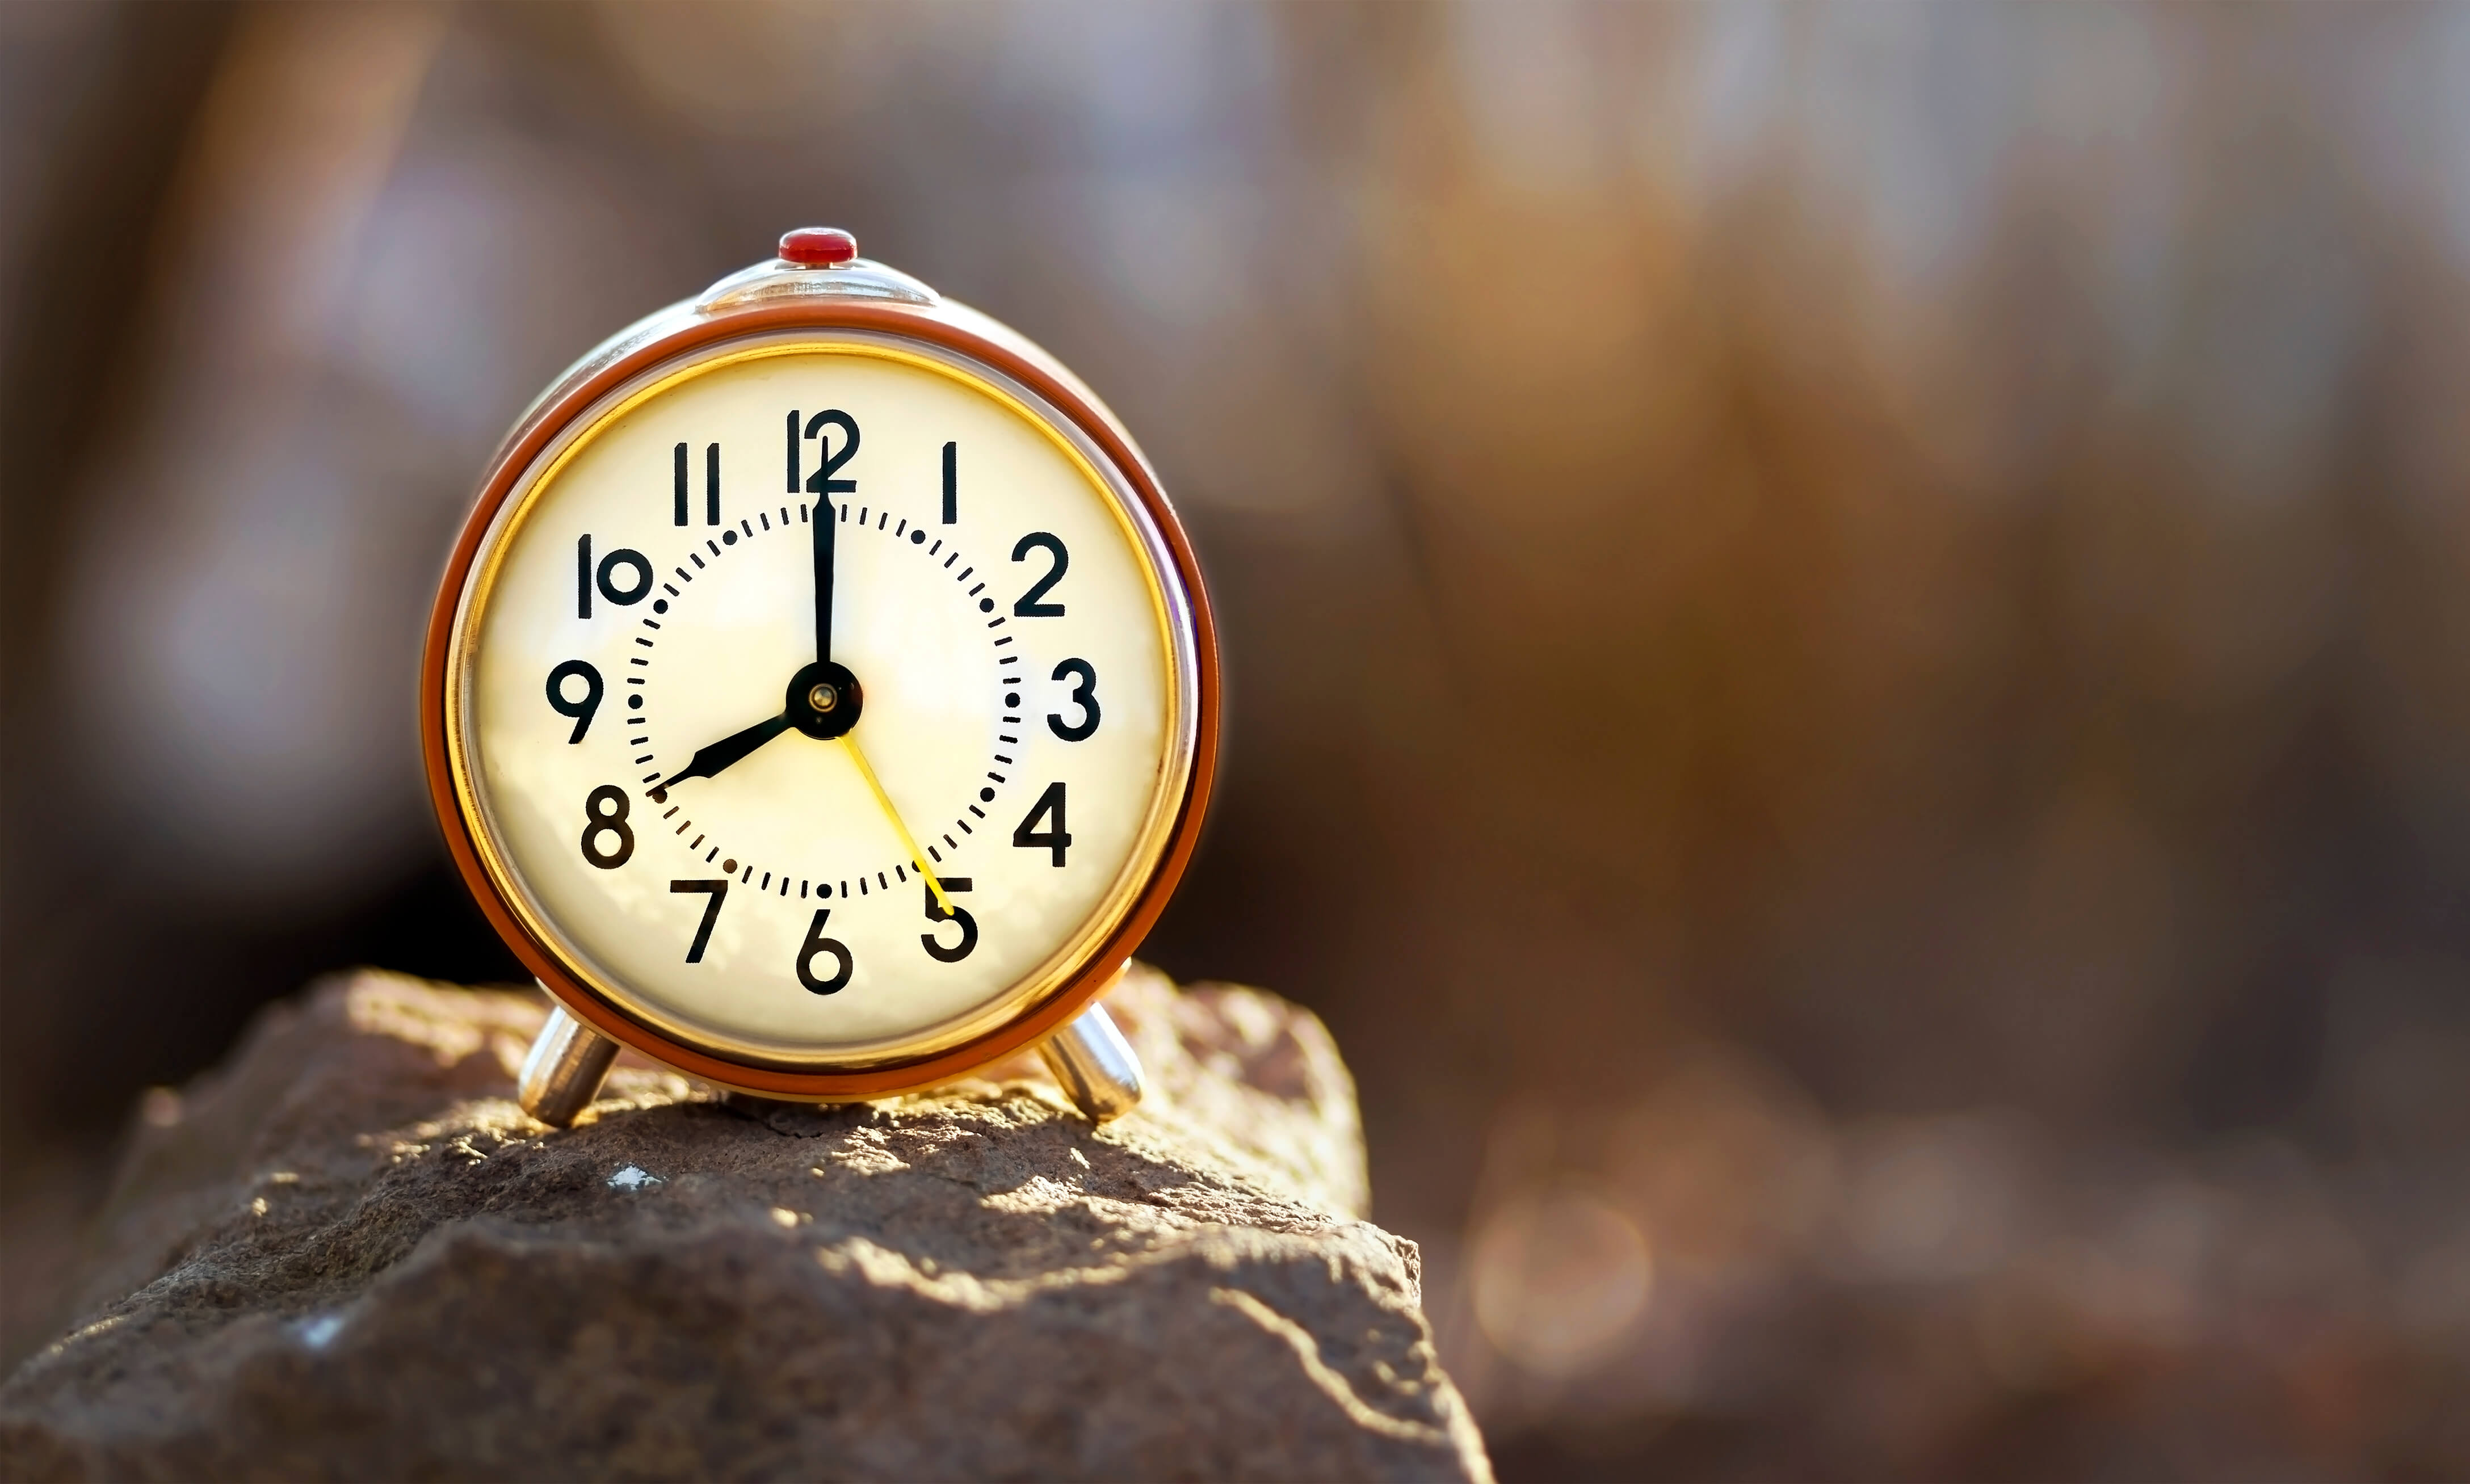 In When: The Scientific Secrets of Perfect Timing